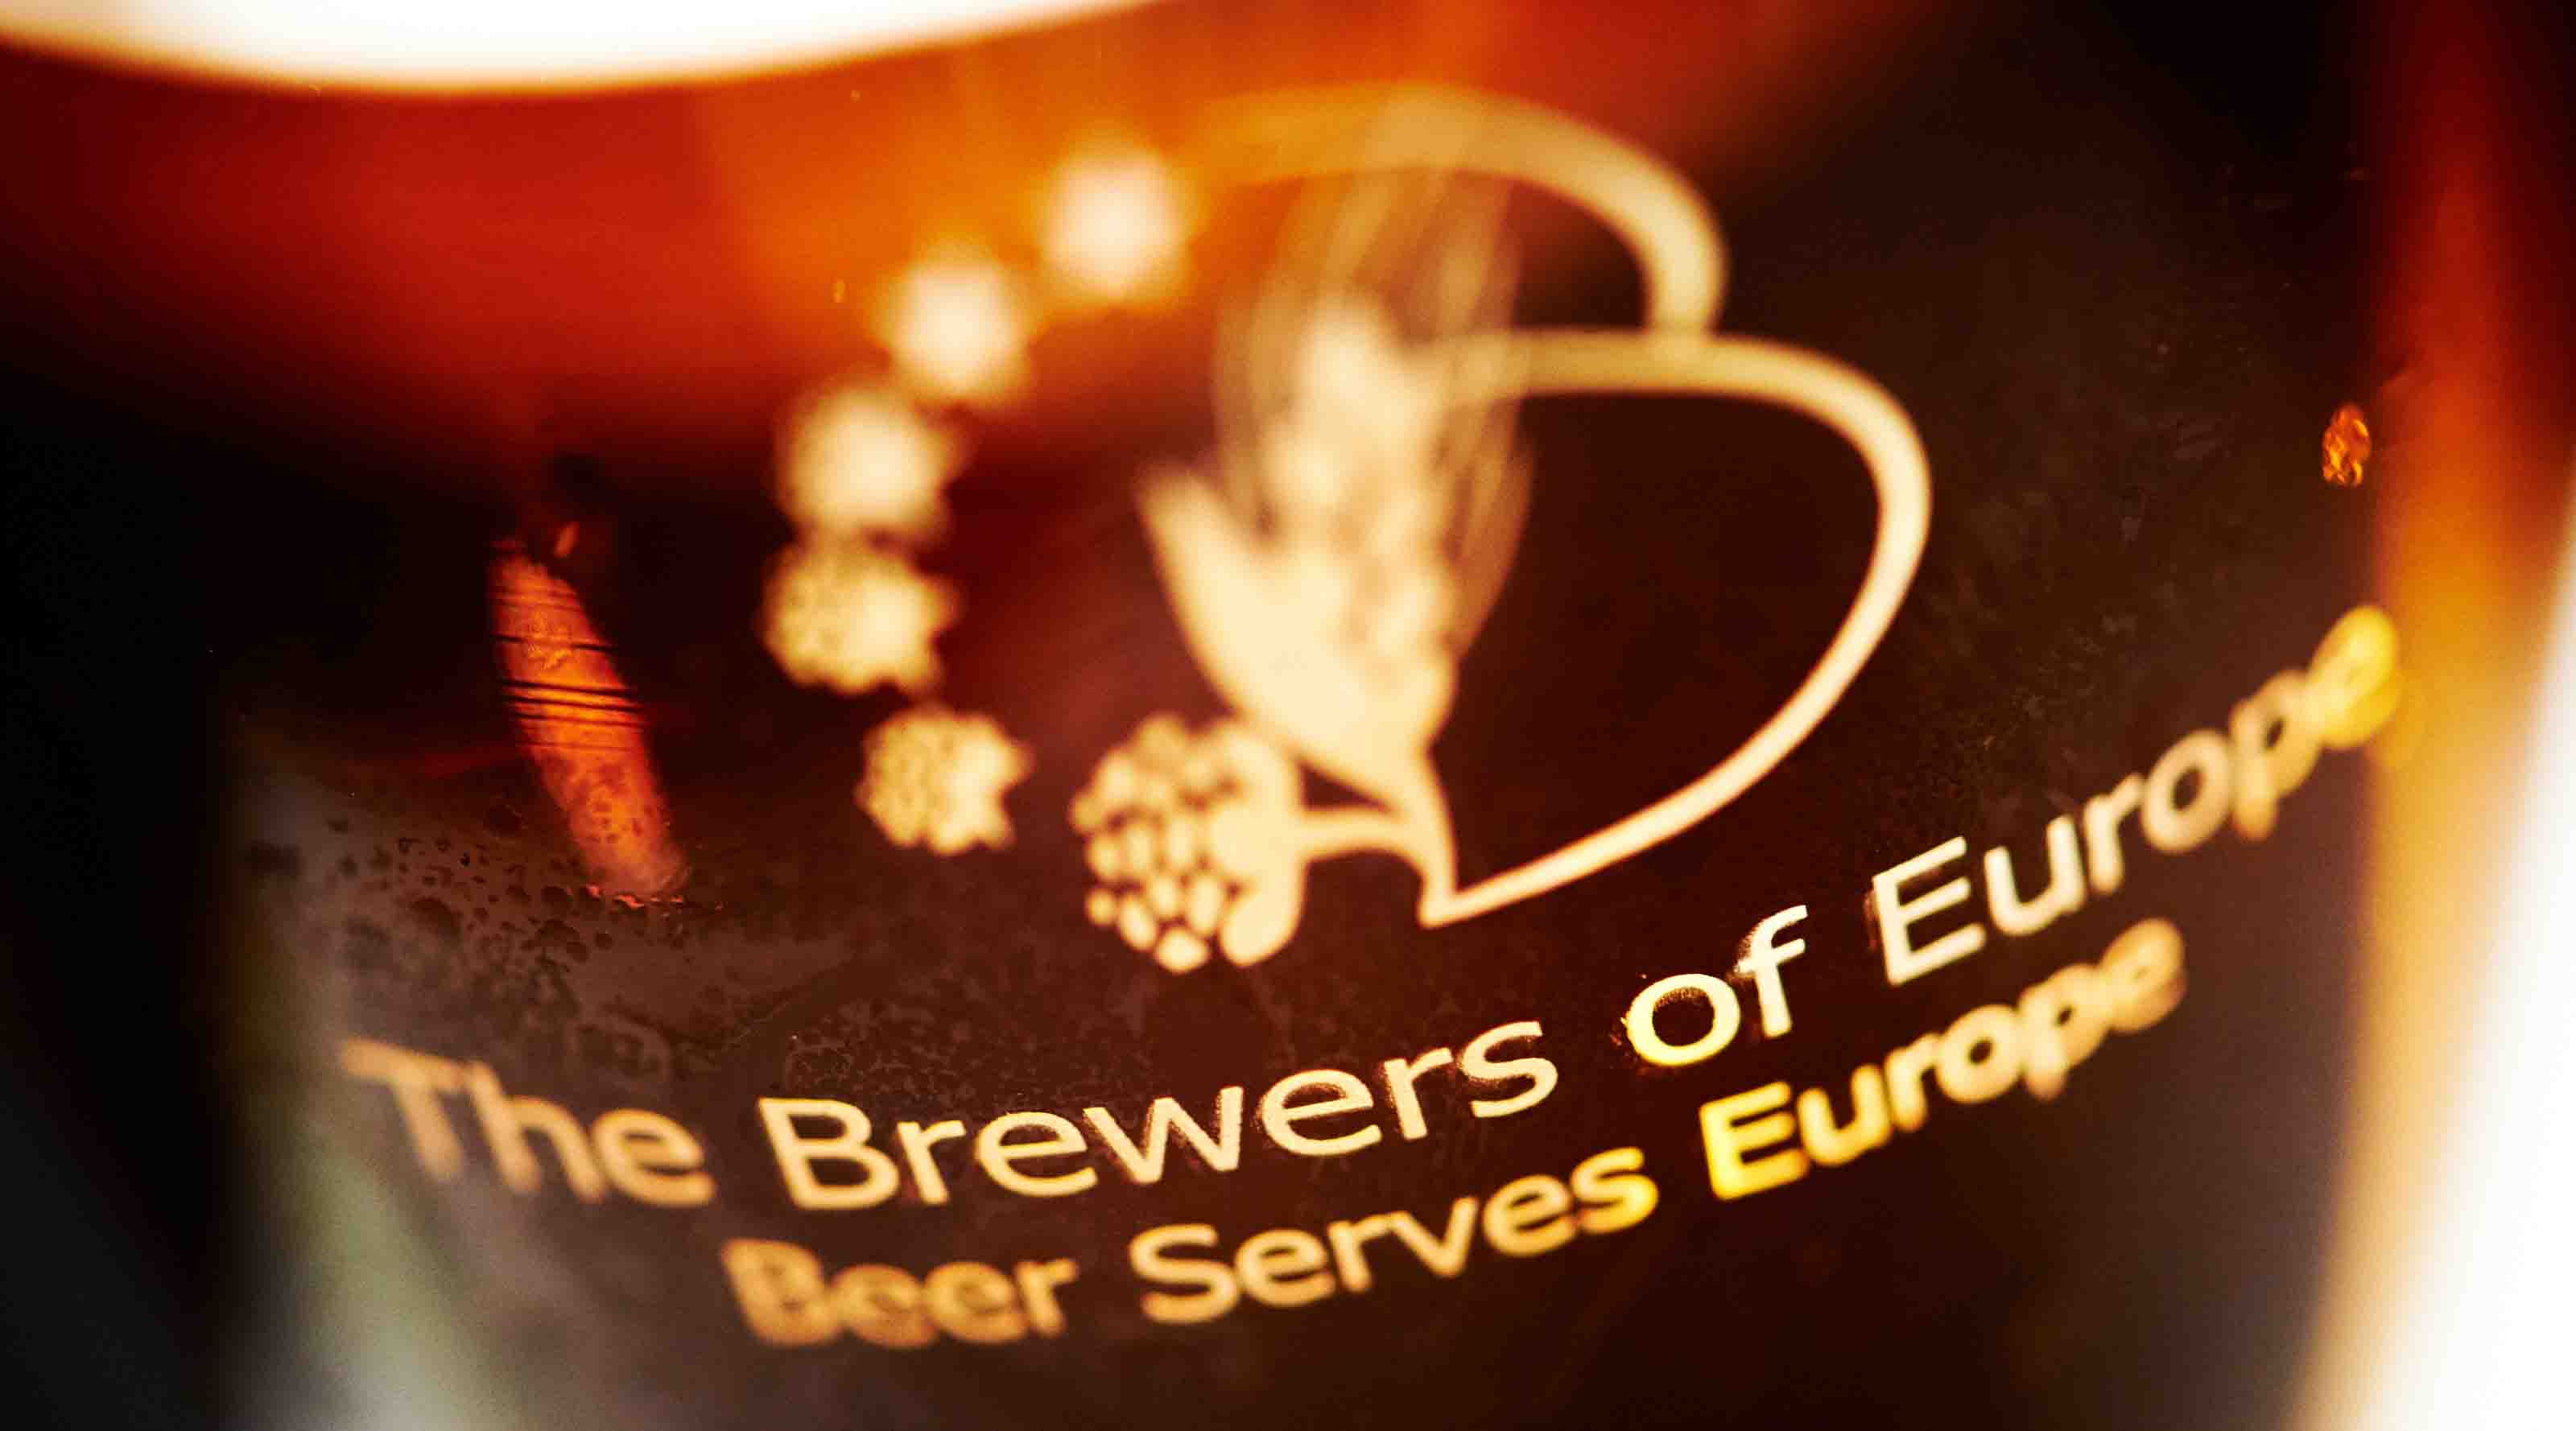 Ireland's beer imports rose in 2019 to 1.7 million HL from 2018's 1.6 million figure which makes Ireland Europe's eighth-largest beer importer, unchanged from 2018.